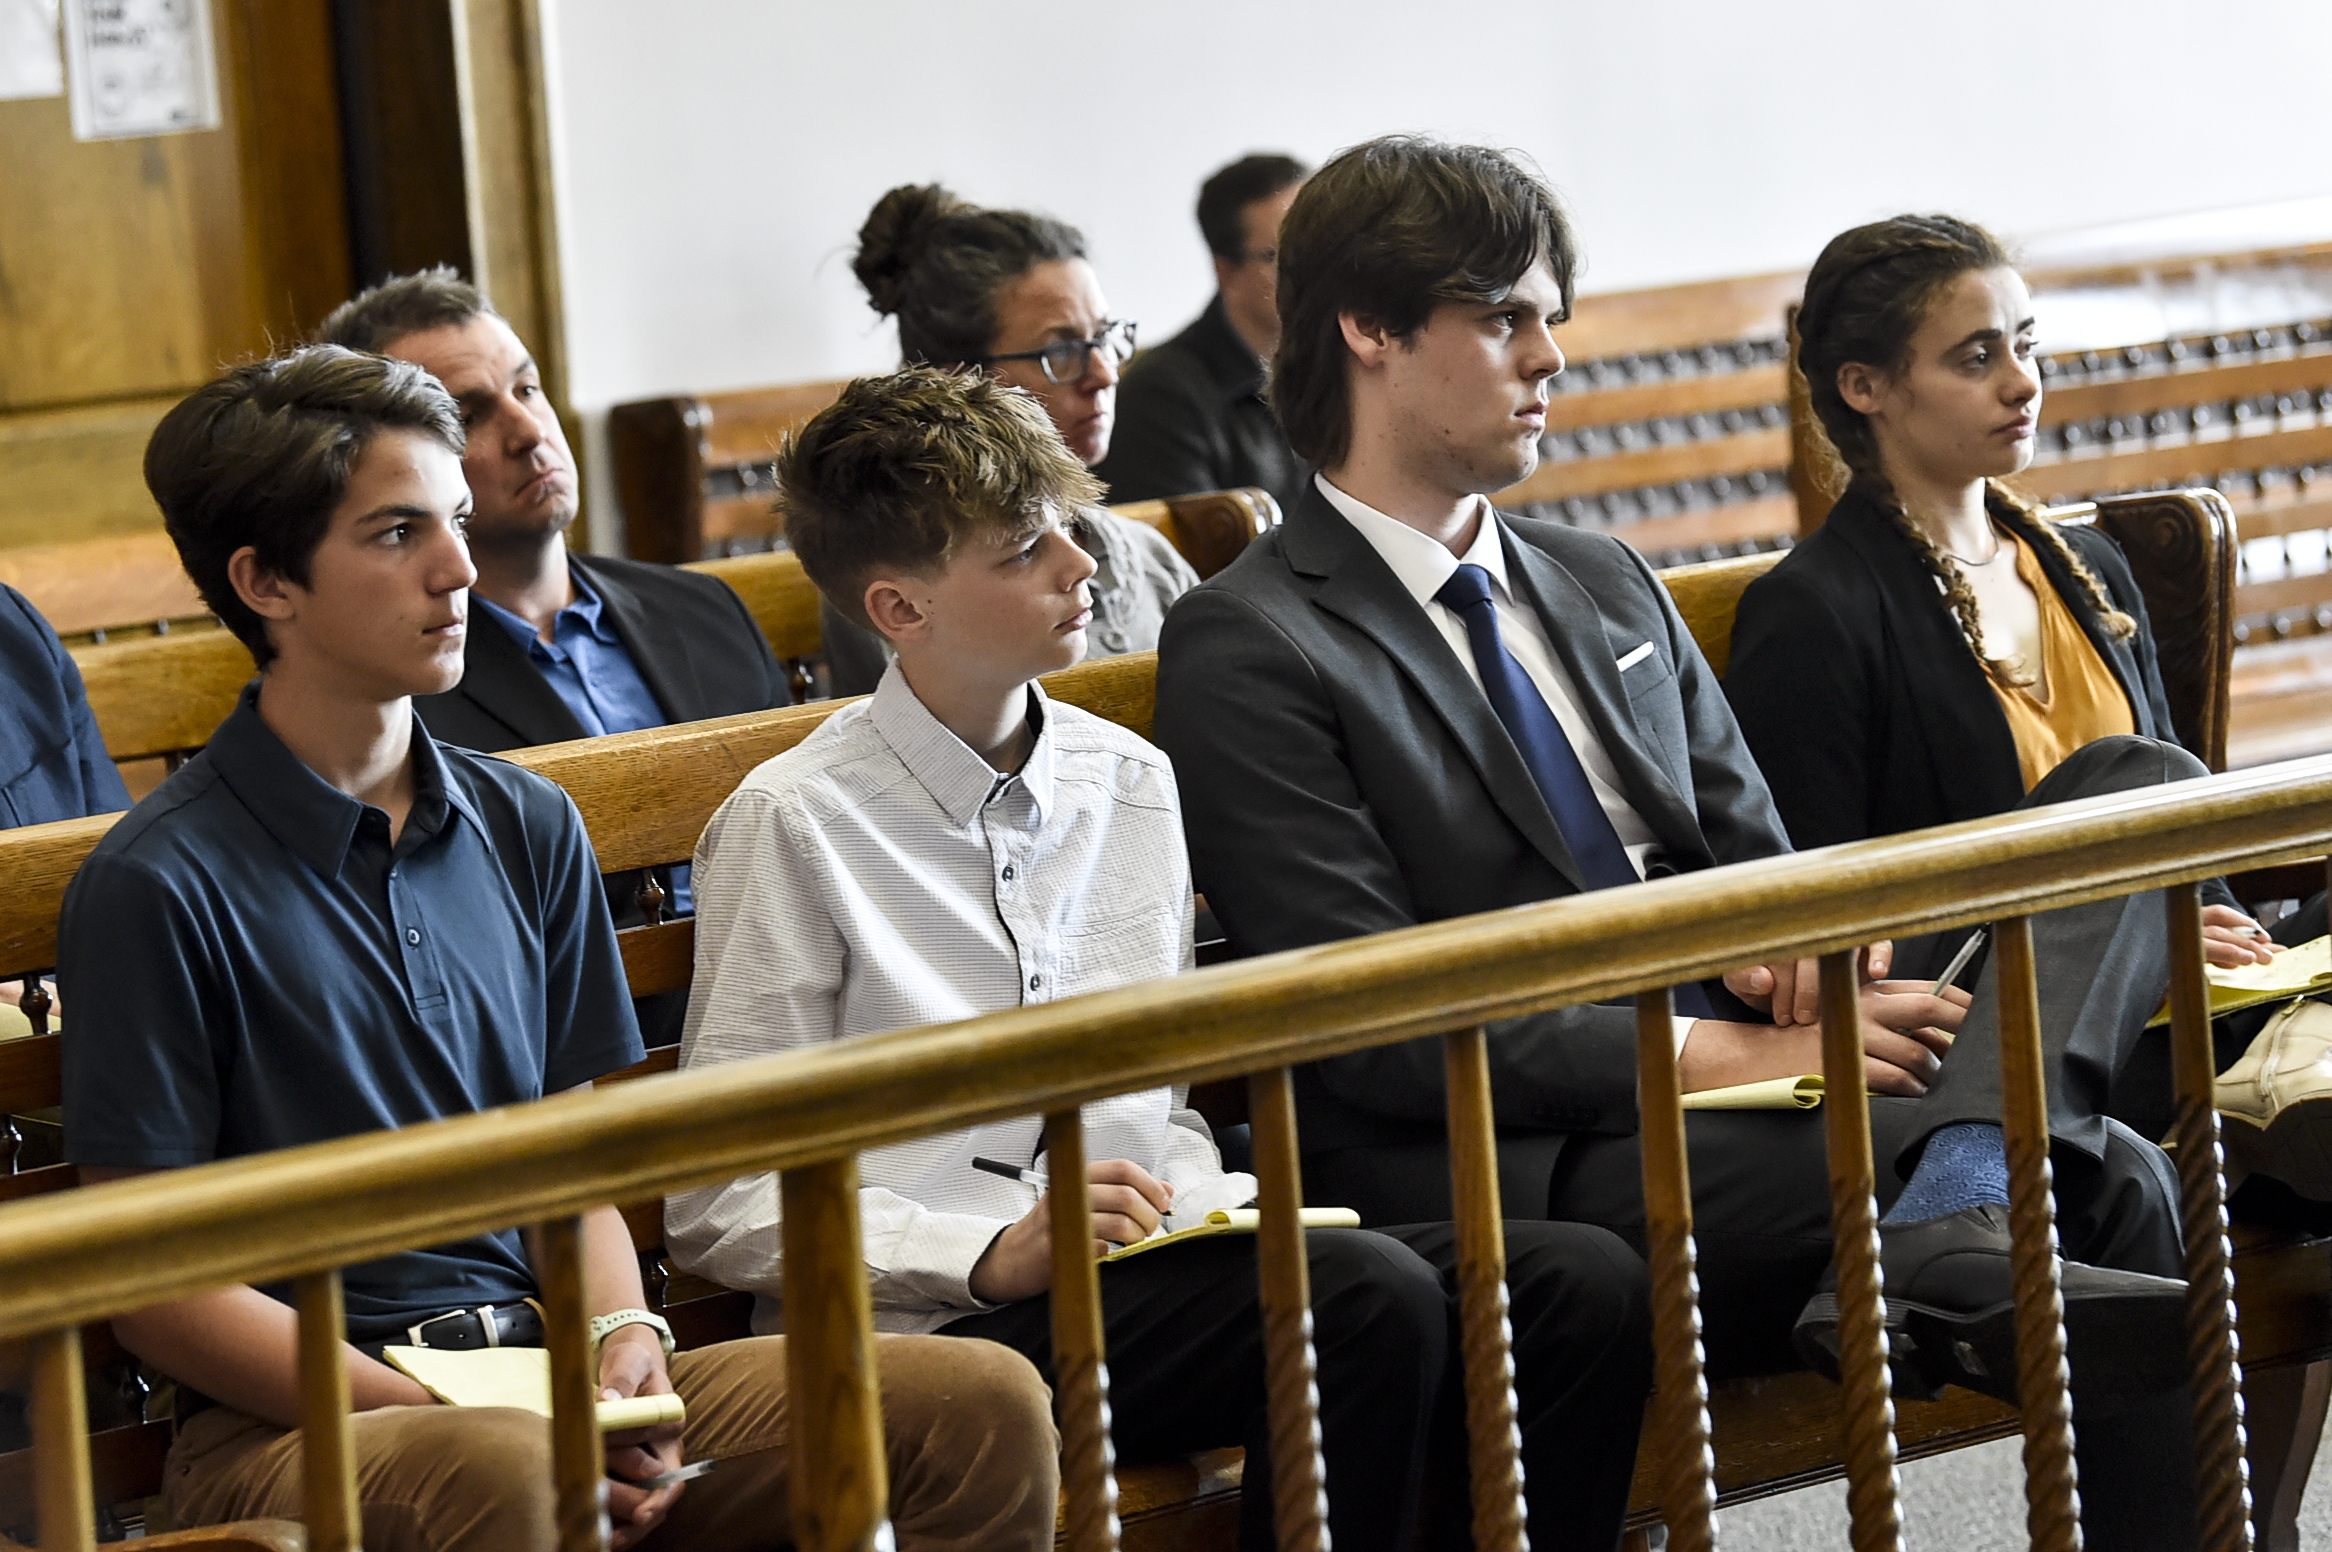 Plaintiffs Mica, 14; Badge 15, Lander 18, and Taleah, 19, listen to arguments during a status hearing on May 12, 2023, in Helena, Mont., for a case that they and other Montana youth filed against the state arguing Montana officials are not meeting their constitutional obligations to protect residents from climate change. The first-of-its-kind trial begins Monday, June 12, 2023, before District Court Judge Kathy Seeley in Helena. It is scheduled to last for two weeks. (Thom Bridge/Independent Record via AP)